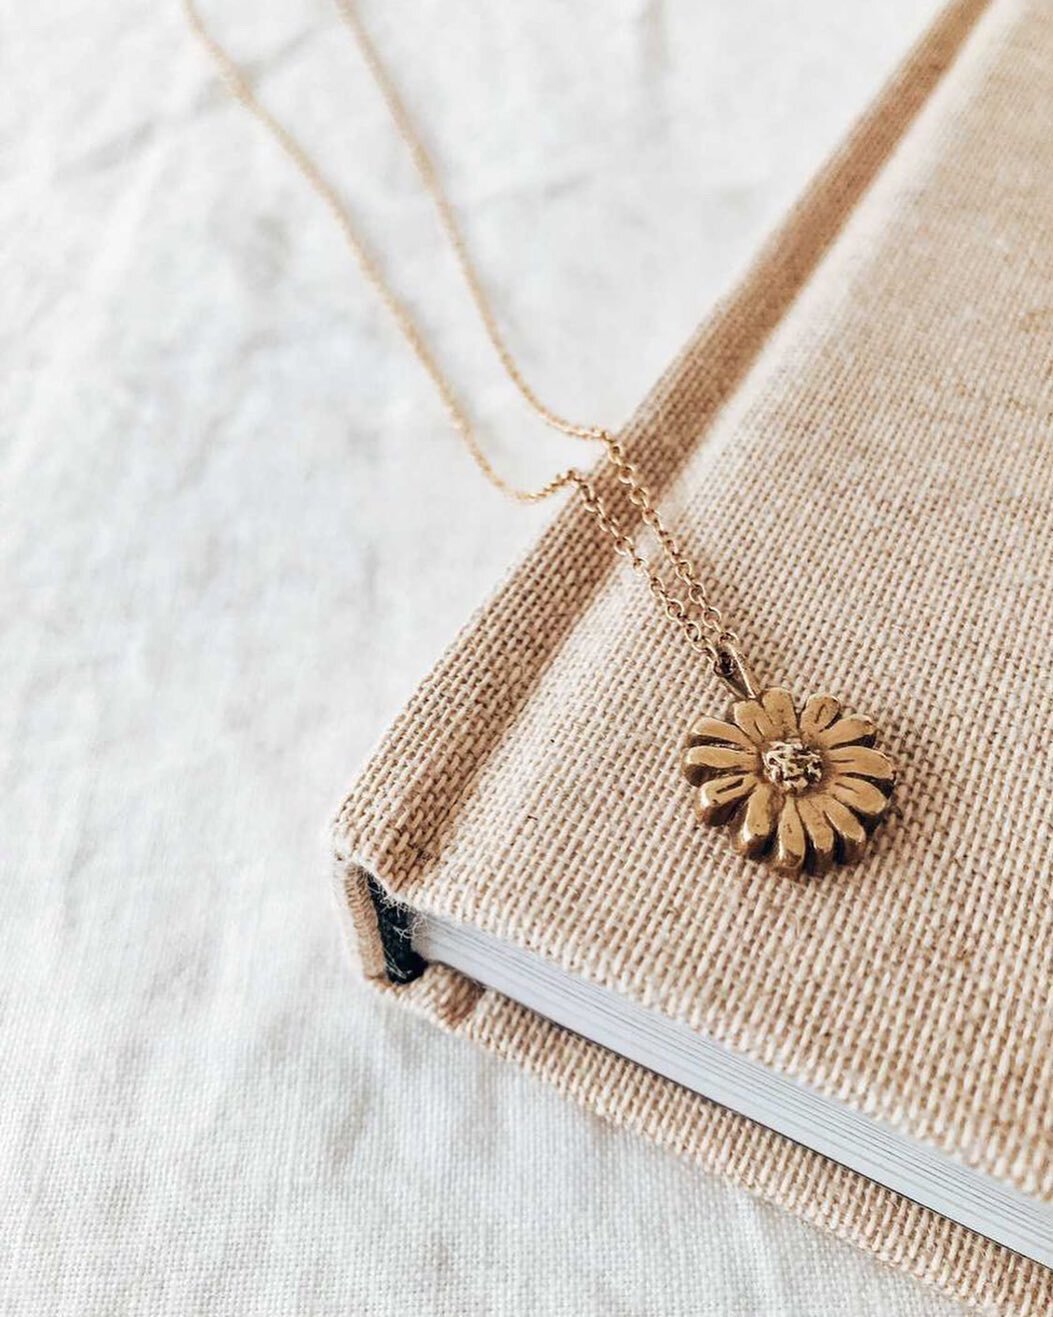 I love daisies.
There&rsquo;s something so whimsical and innocent about them.
When I carved this little daisy I was envisioning wandering through a field of wild daisies, smelling spring air &amp; listening to bees buzzing happily.
And that&rsquo;s t